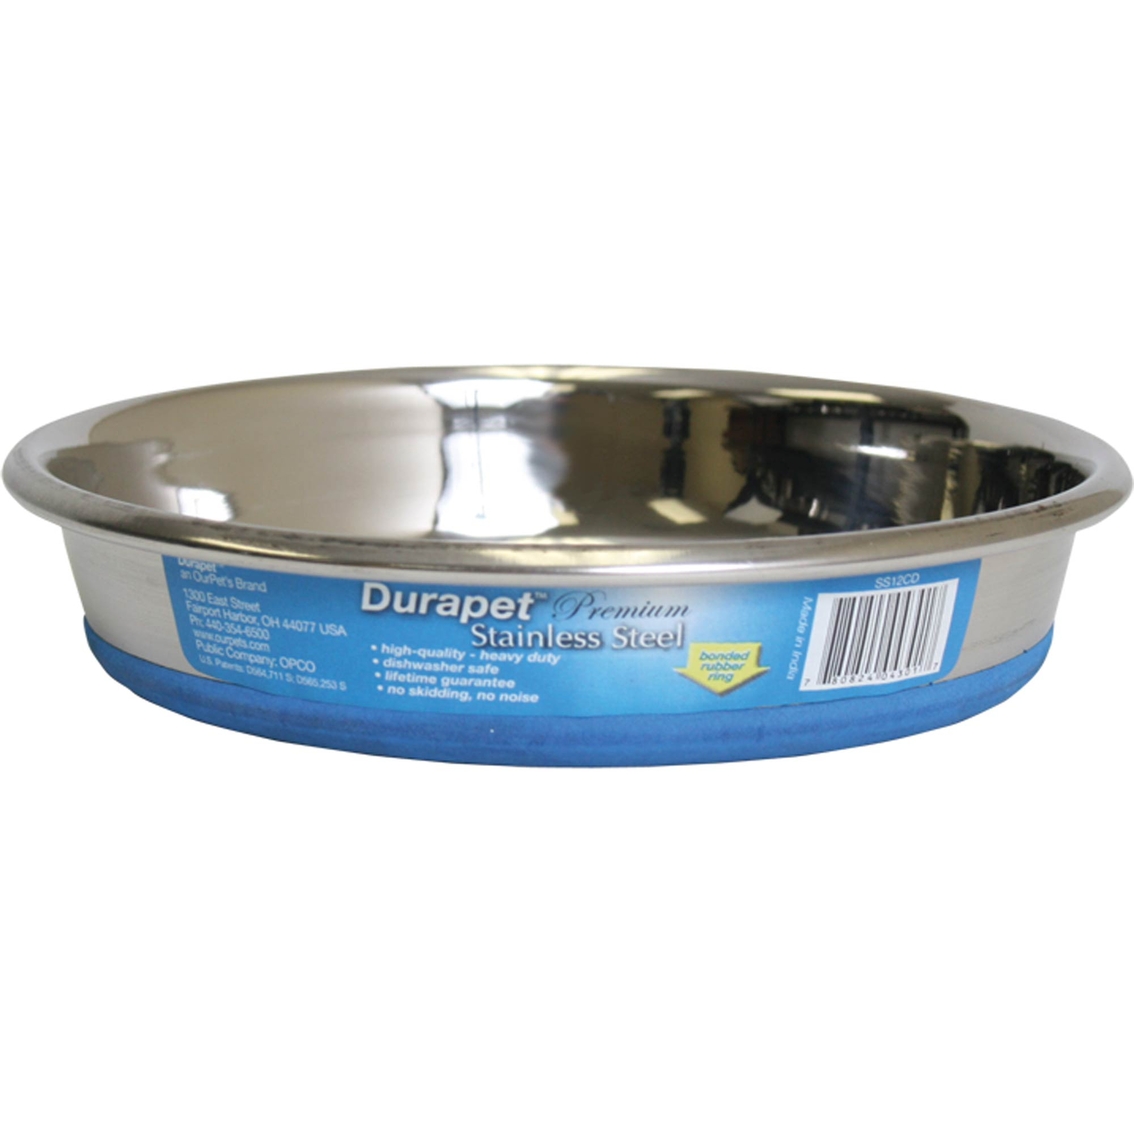 Ourpet's Durapet Premium Rubber-bonded Stainless Steel Cat Dish Bowl ...